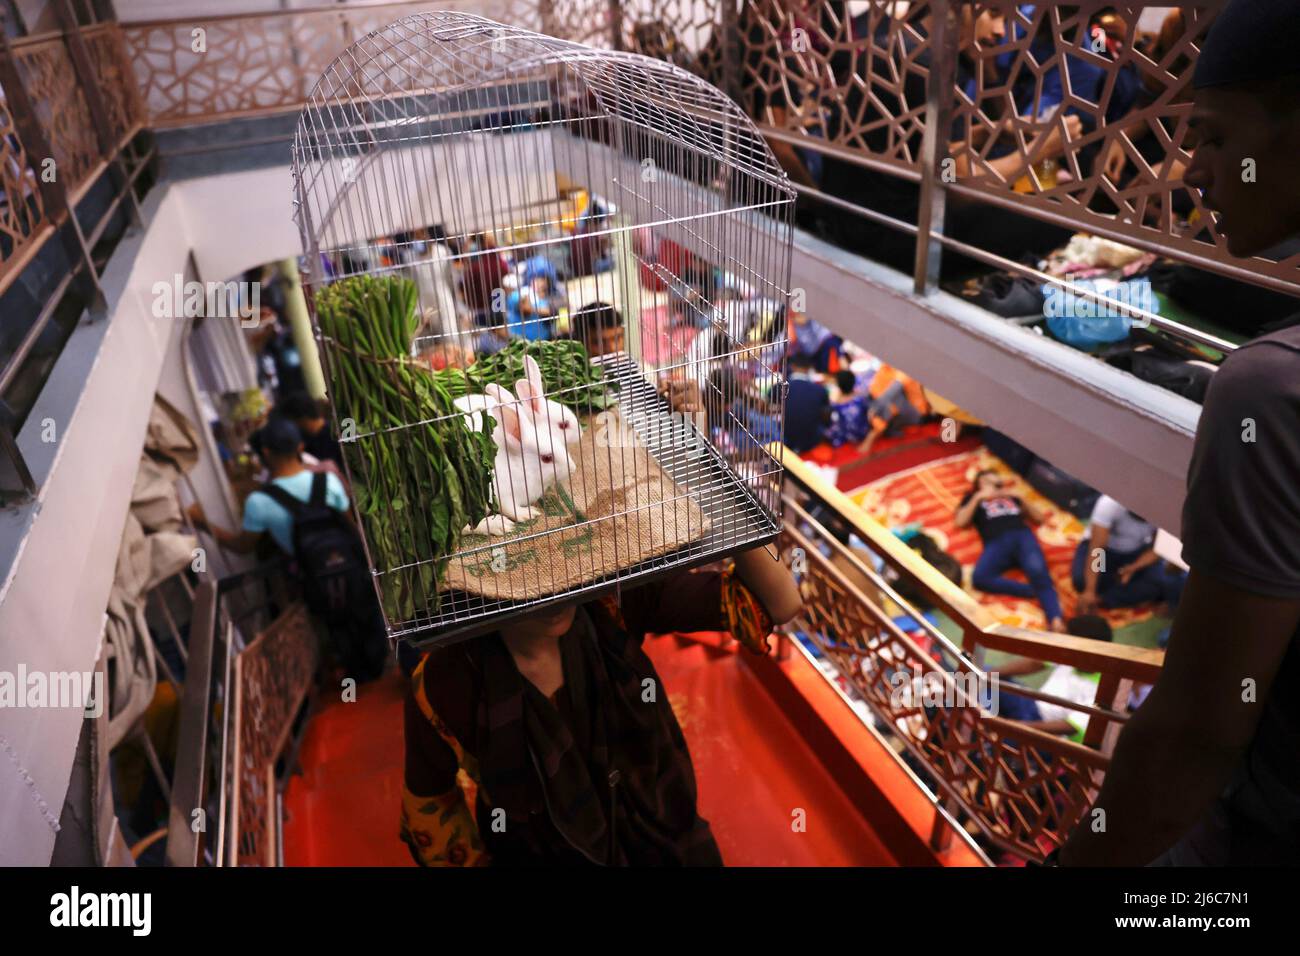 A girl carries a cage with rabbits inside it as she gets onboard a passenger ferry to travel home to celebrate Eid al-Fitr, in Dhaka, Bangladesh, April 30, 2022. REUTERS/Mohammad Ponir Hossain Stock Photo